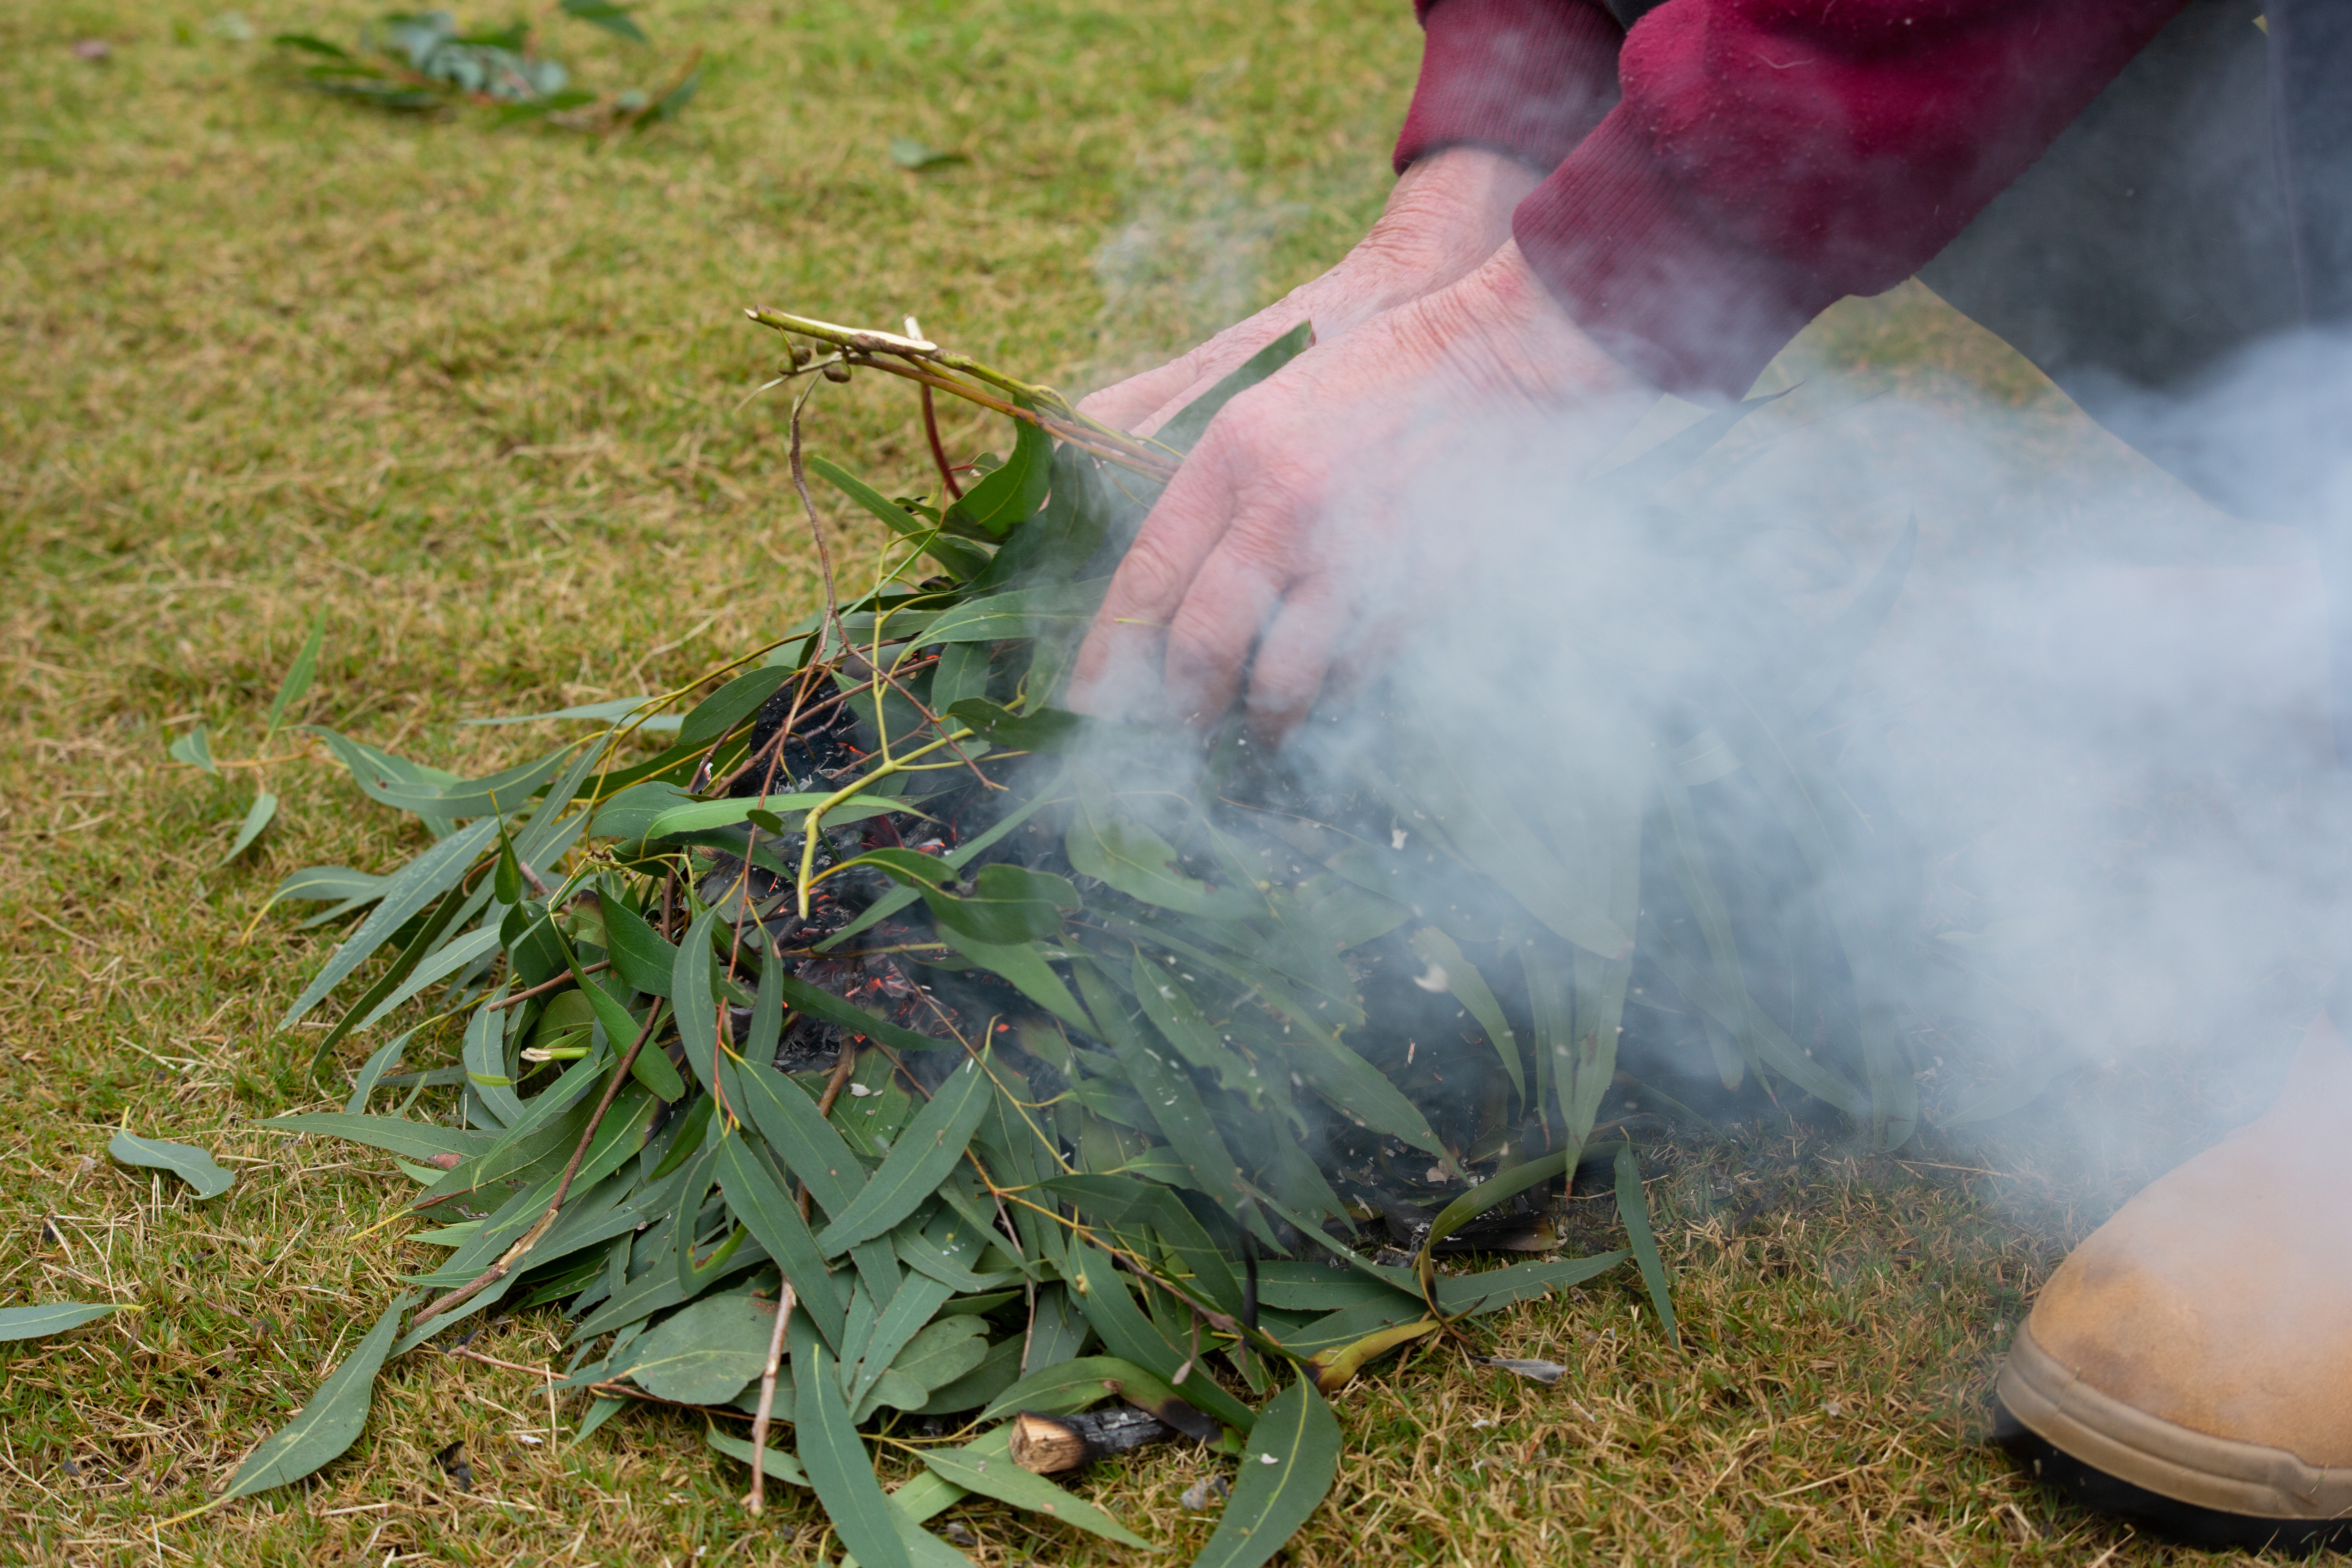 A person carrying out a traditional smoking ceremony